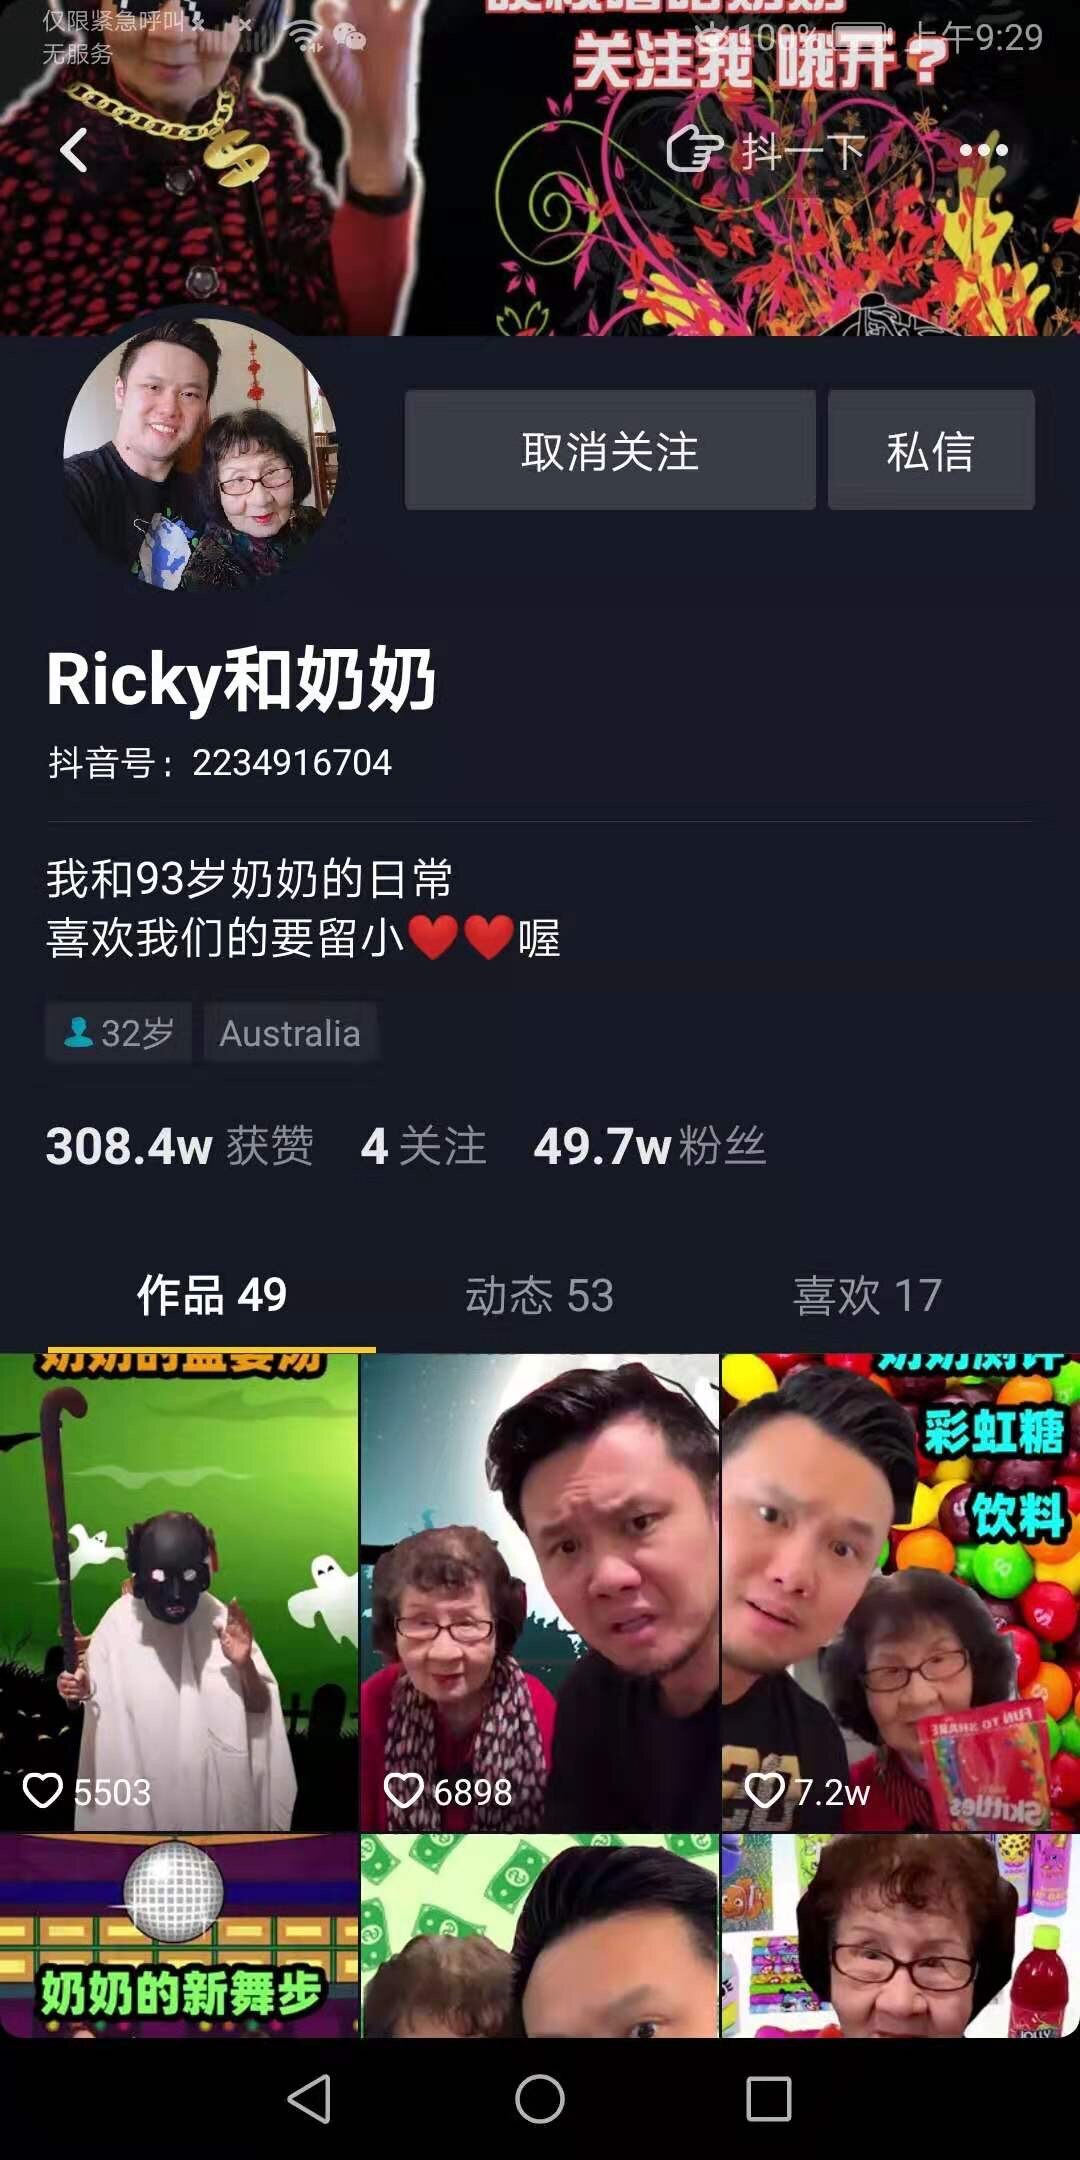 A screenshot of the app Douyin, showing Thomas Cheung's videos with his grandmother.